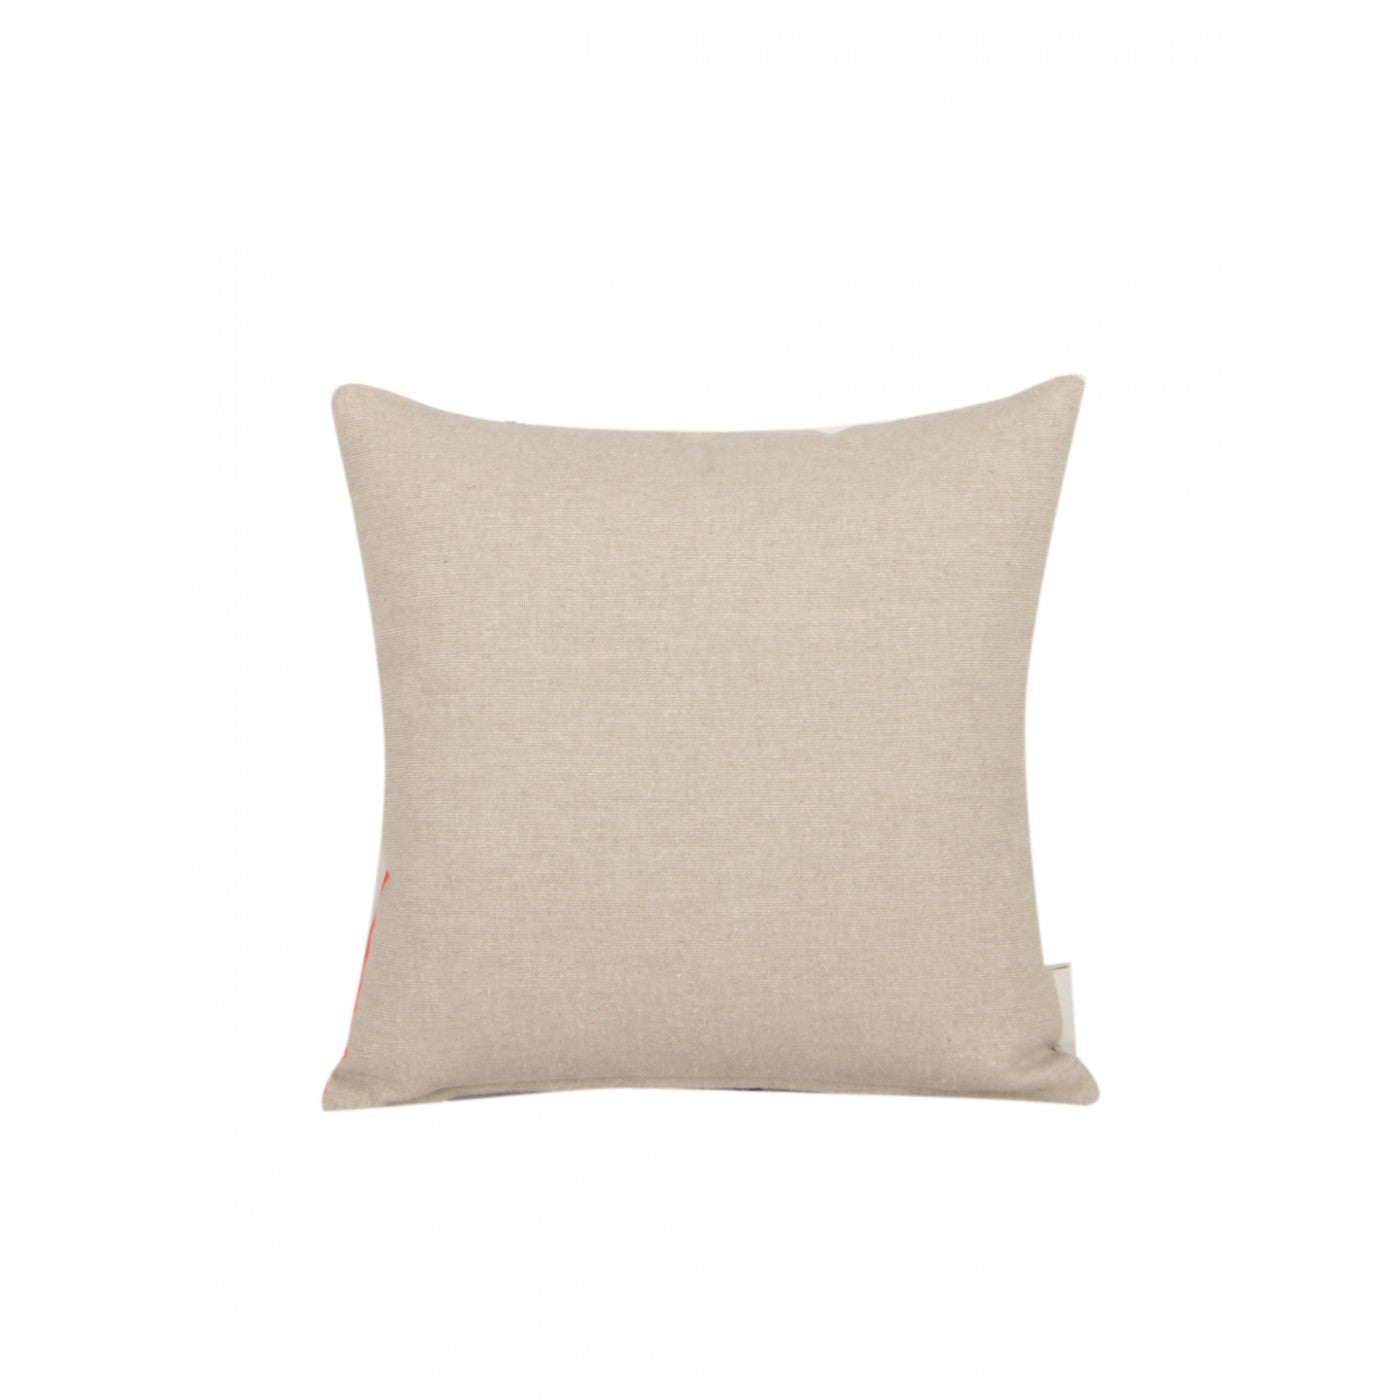 Printed & Embroidered Cushion Covers 12x12 Inch - Blend of Tradition and Trend